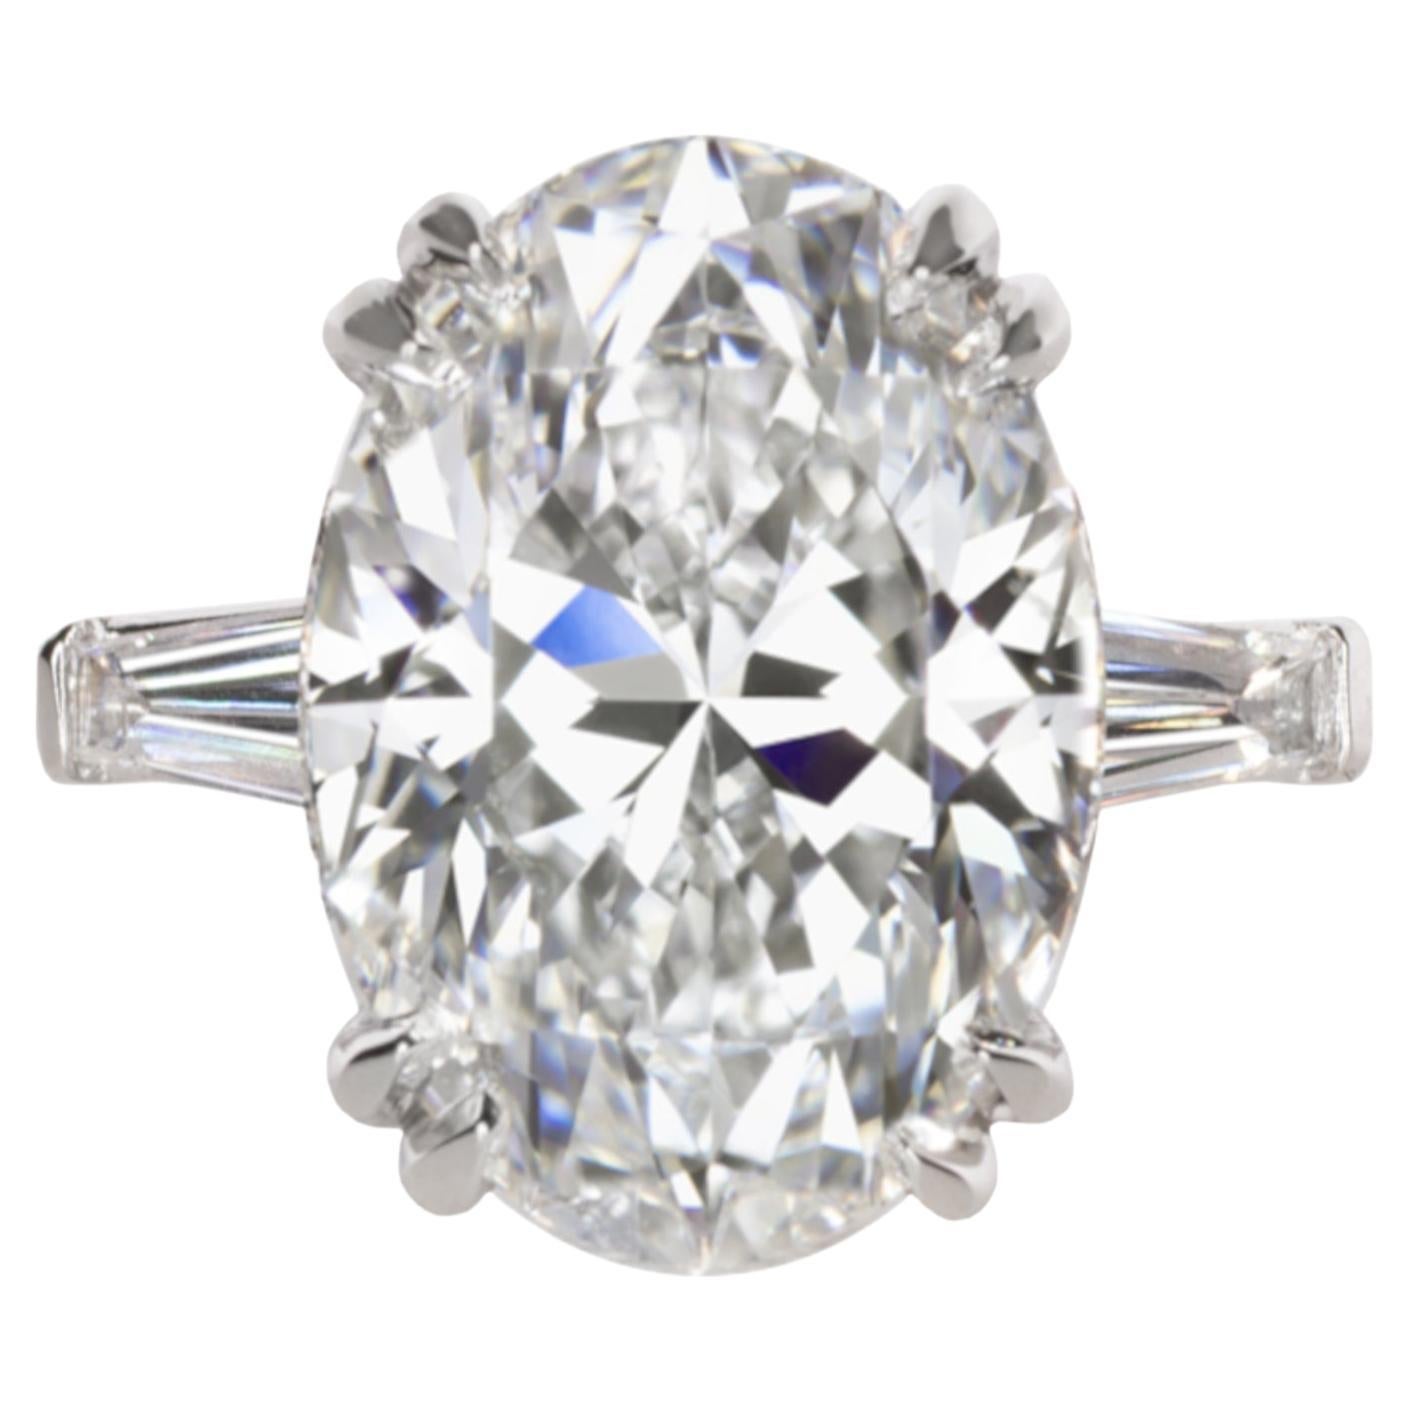 GIA Certified 4 Carat Excellent Cut Ring Internally Flawless E Color For Sale